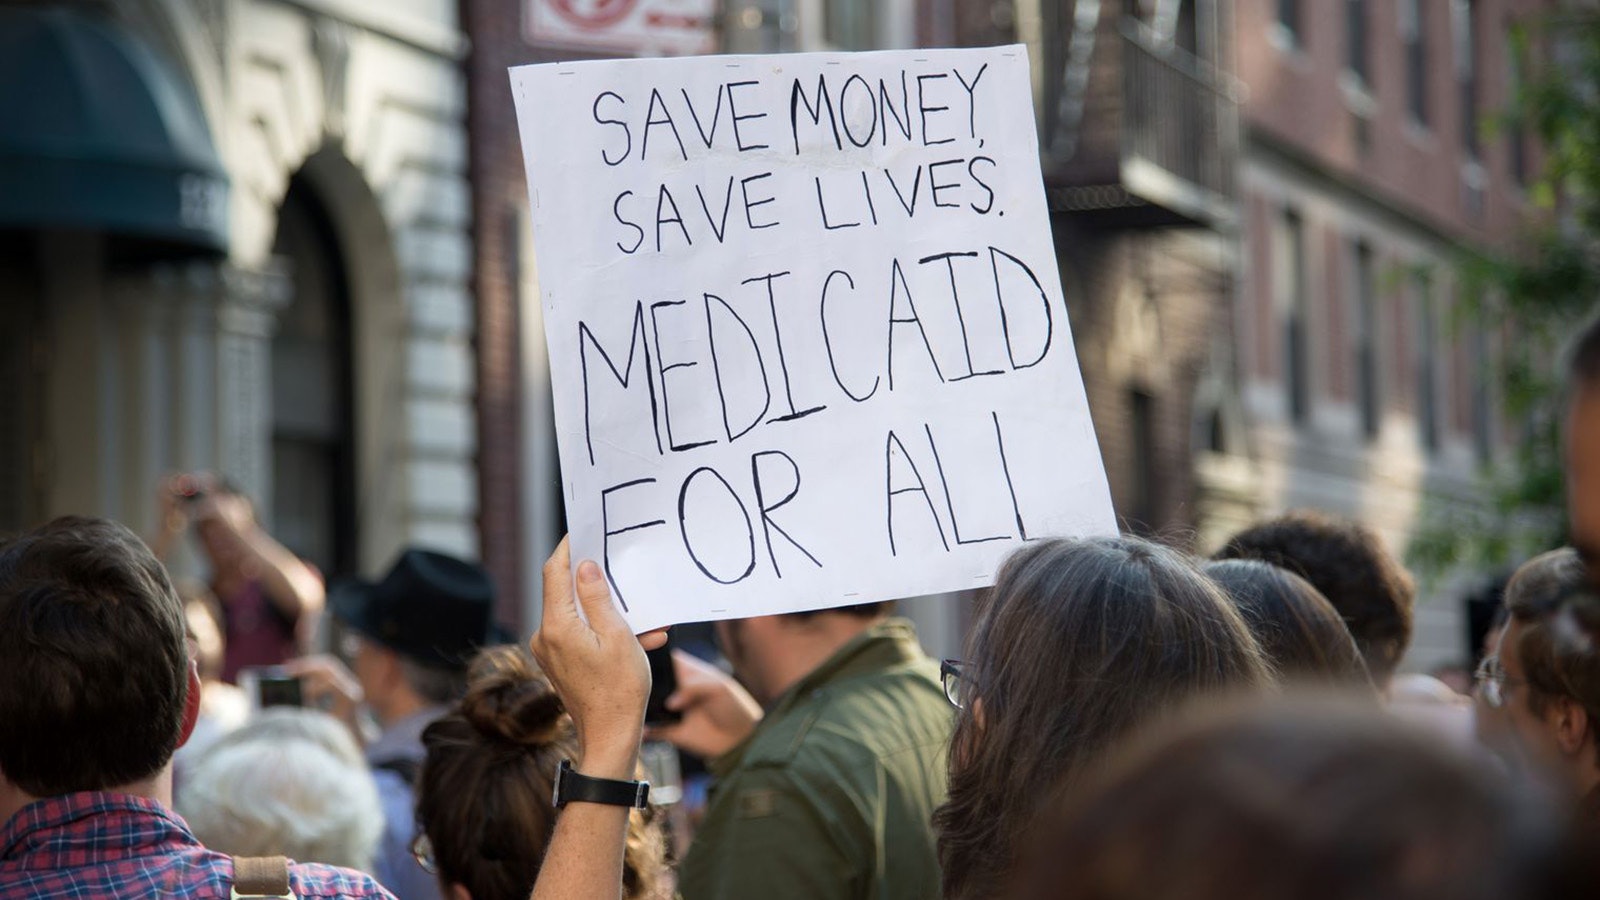 A rally in support of Medicaid expansion in New York in this file photo. Wyoming legislators have repeatedly rejected Medicaid expansion.